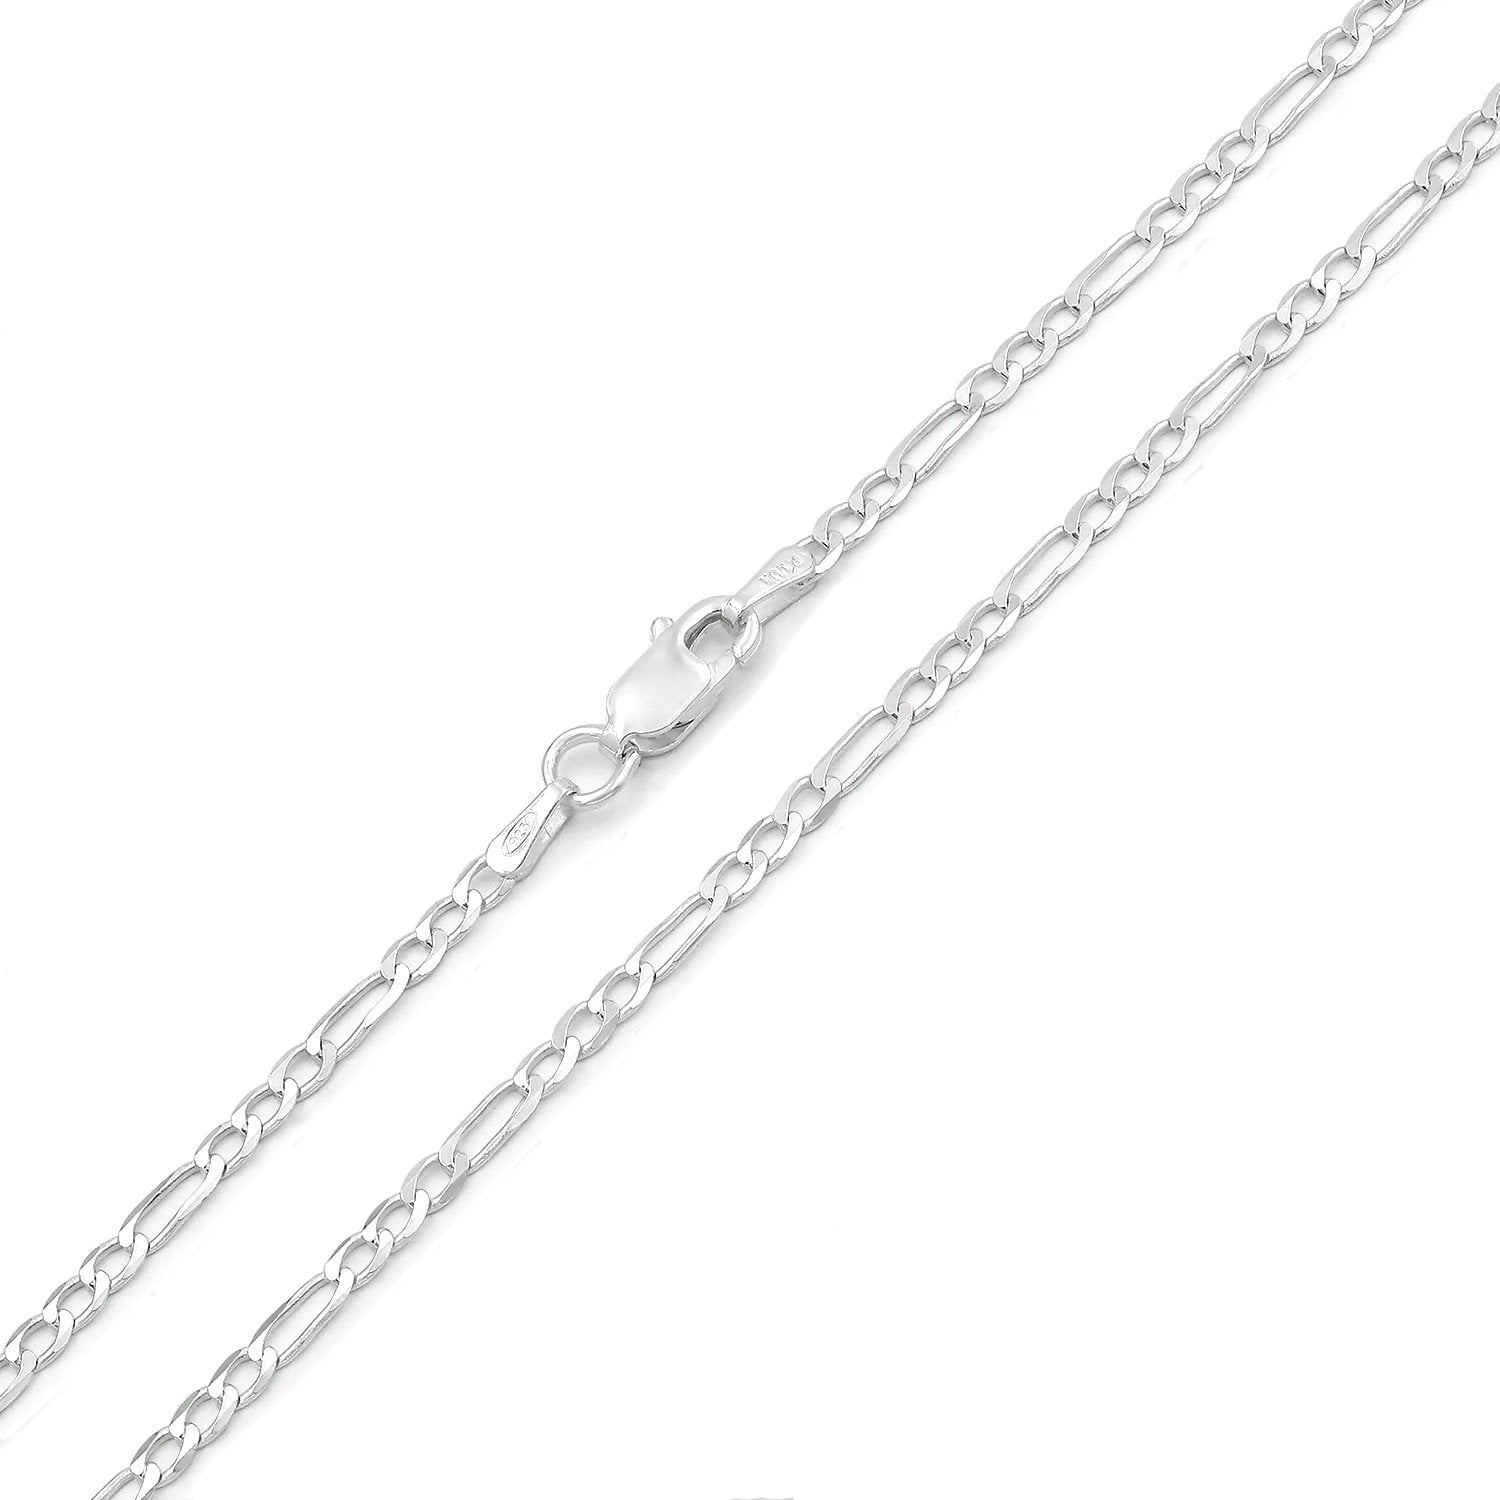 Details about   Made in Italy 4MM 925 Sterling Silver Figaro link Men's Necklace 26in 